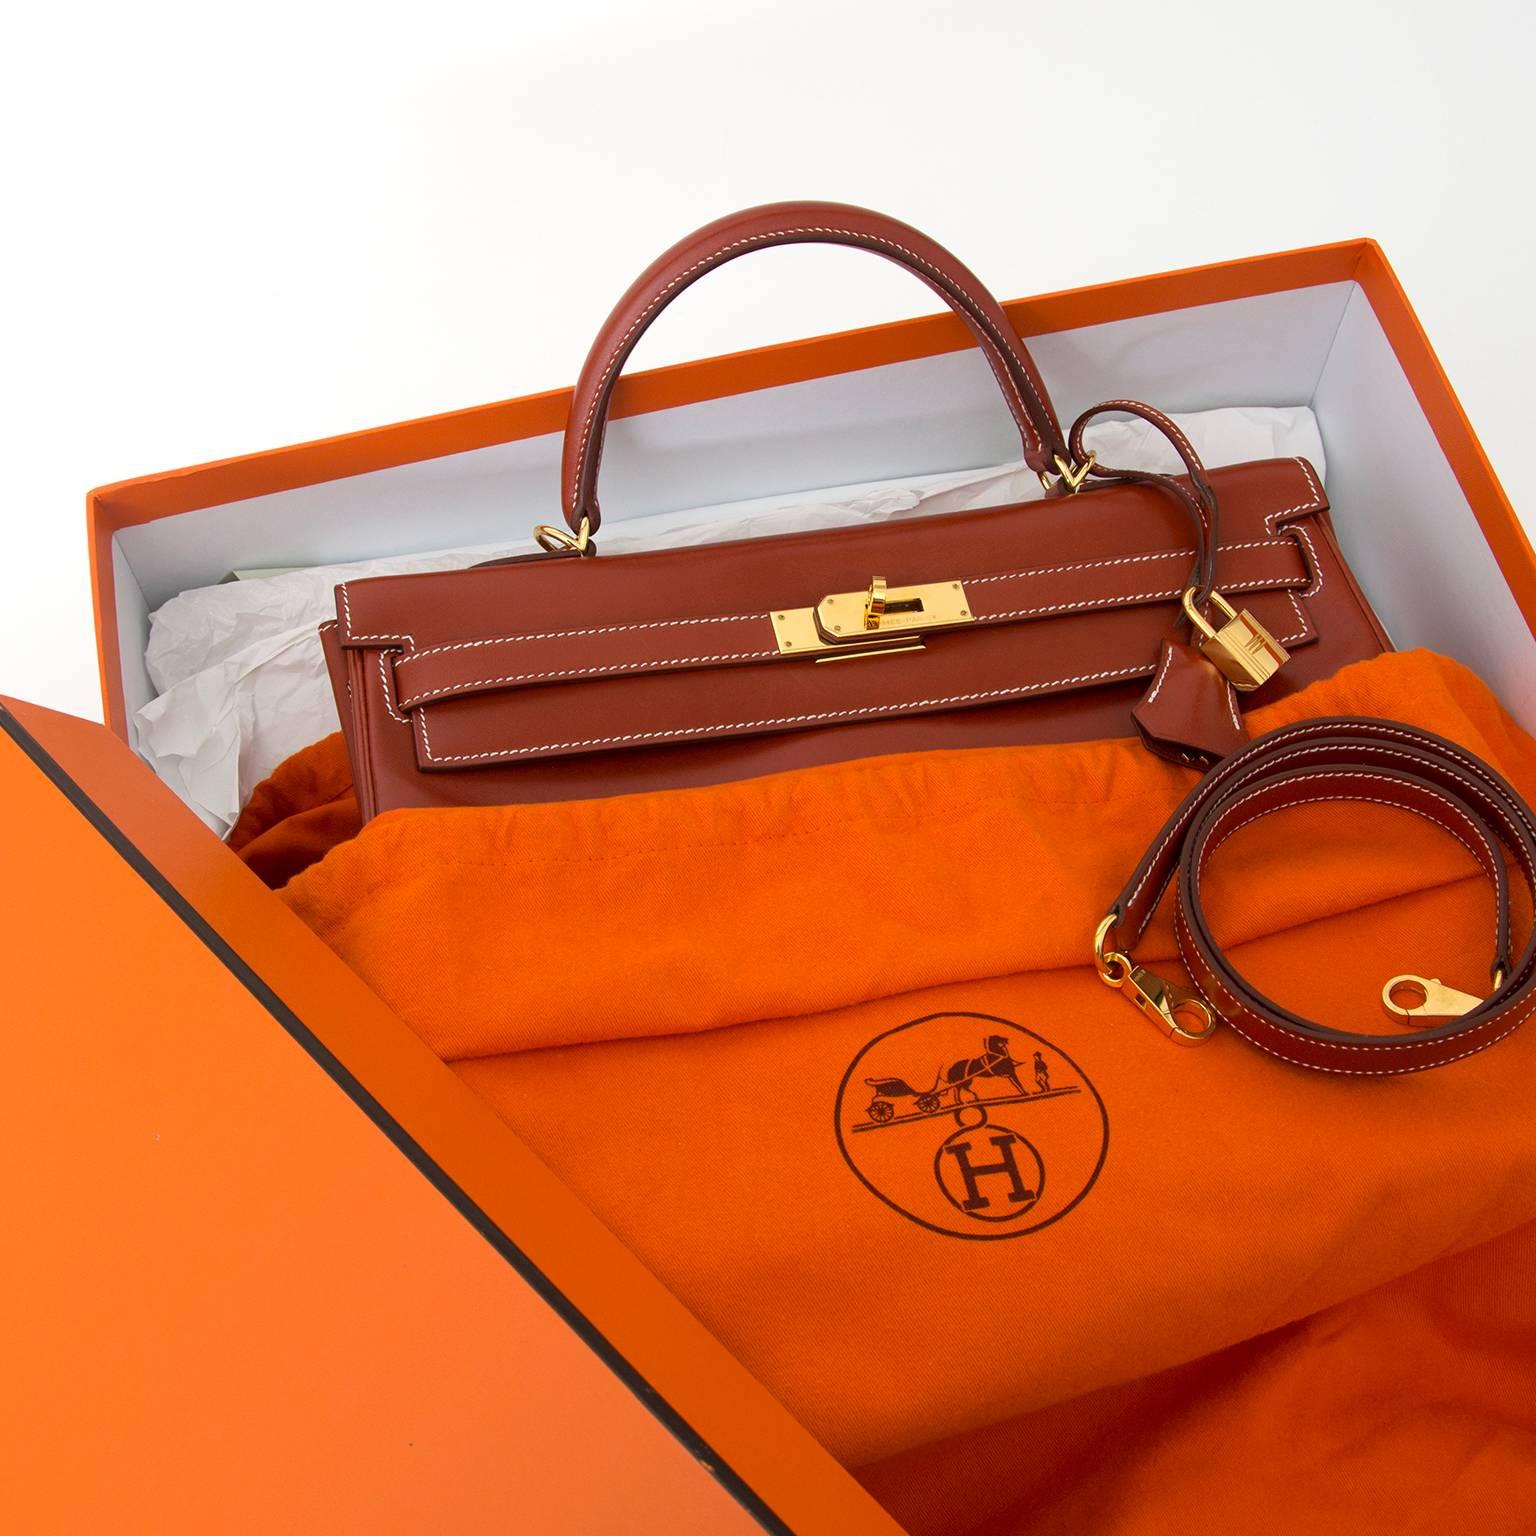 Hermès Kelly Brique Box Calf 35 GHW

The Hermès Kelly bag is one of the most desired bags in the world.
This vintage beauty is made of smooth and glossy calf skin that is more rigid than the grainy leathers, the box calf leather develops a